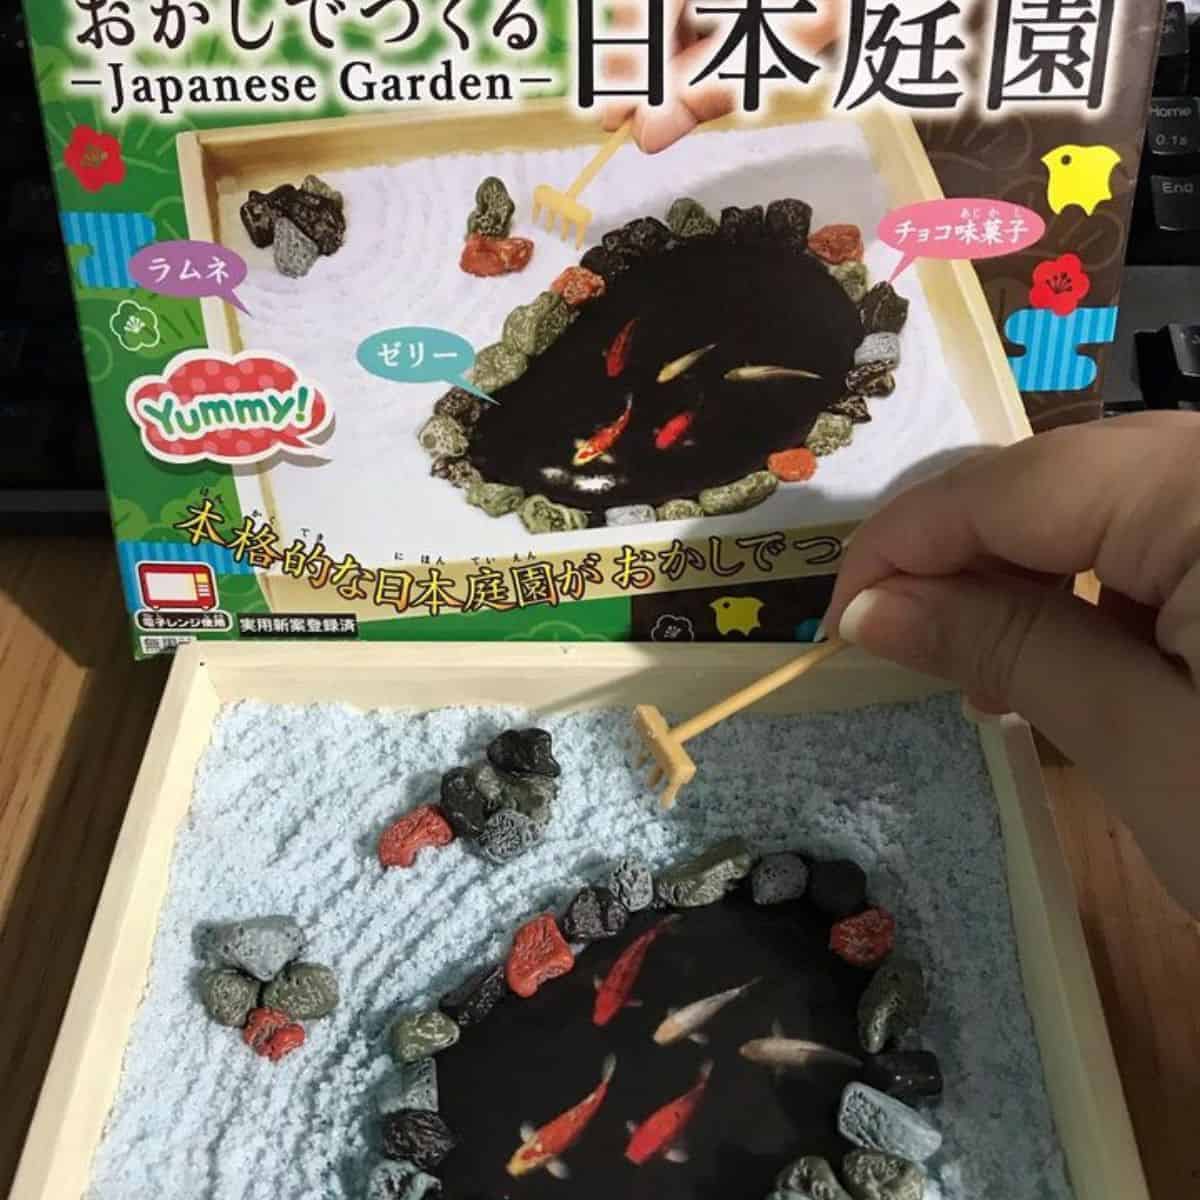 A person creating Japanese Garden using DIY candy kit with stones and colourful fishes